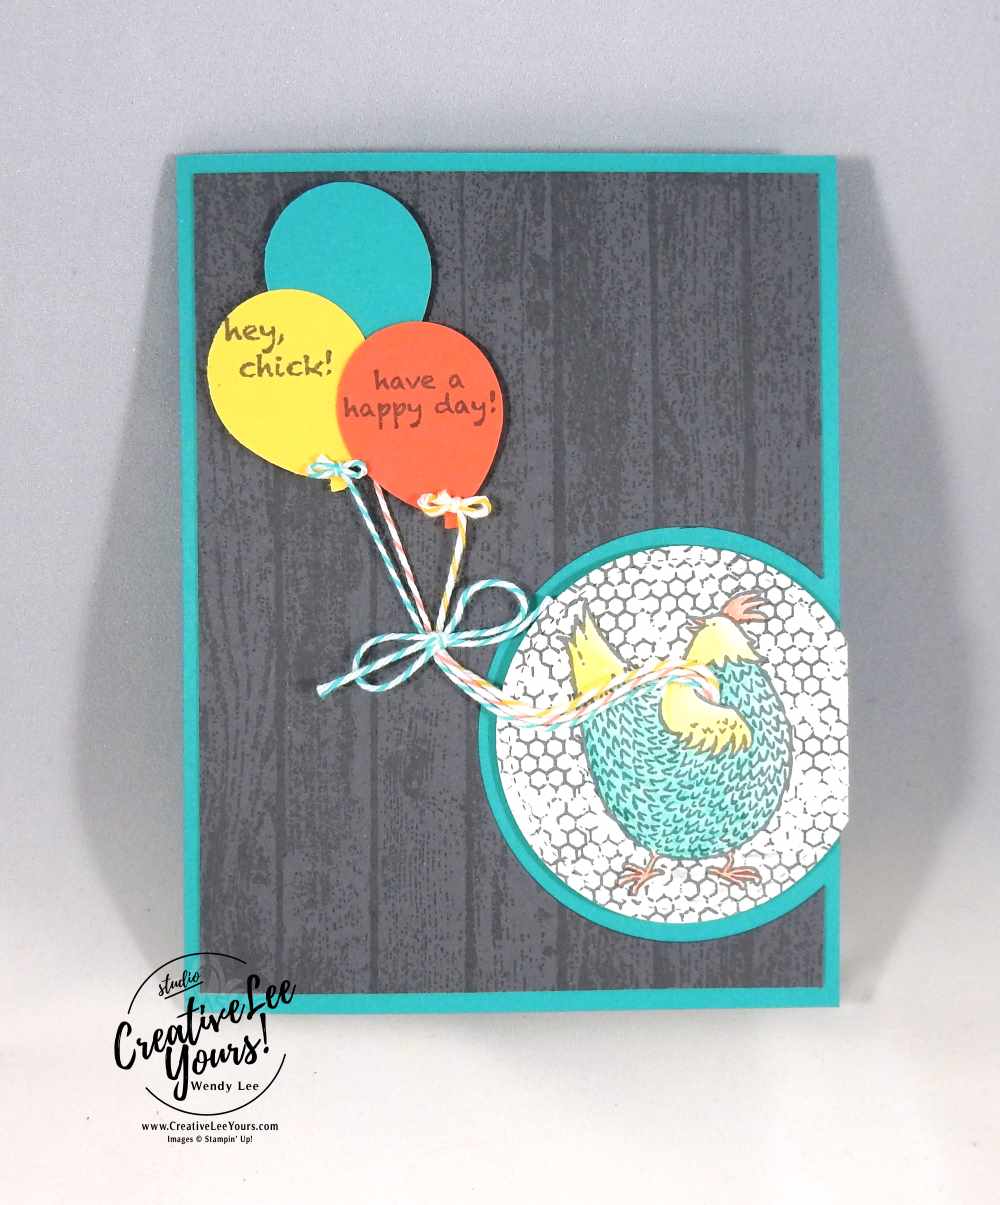 Hey Chick Birthday Balloons by Sheila Tatum, Stampin Up, #creativeleeyours, creatively yours, Hey Chick stamp set, butterfly basics stamp set, hardwood stamp set, diemonds team swap, hand stamped masculine birthday card, #SAB2017